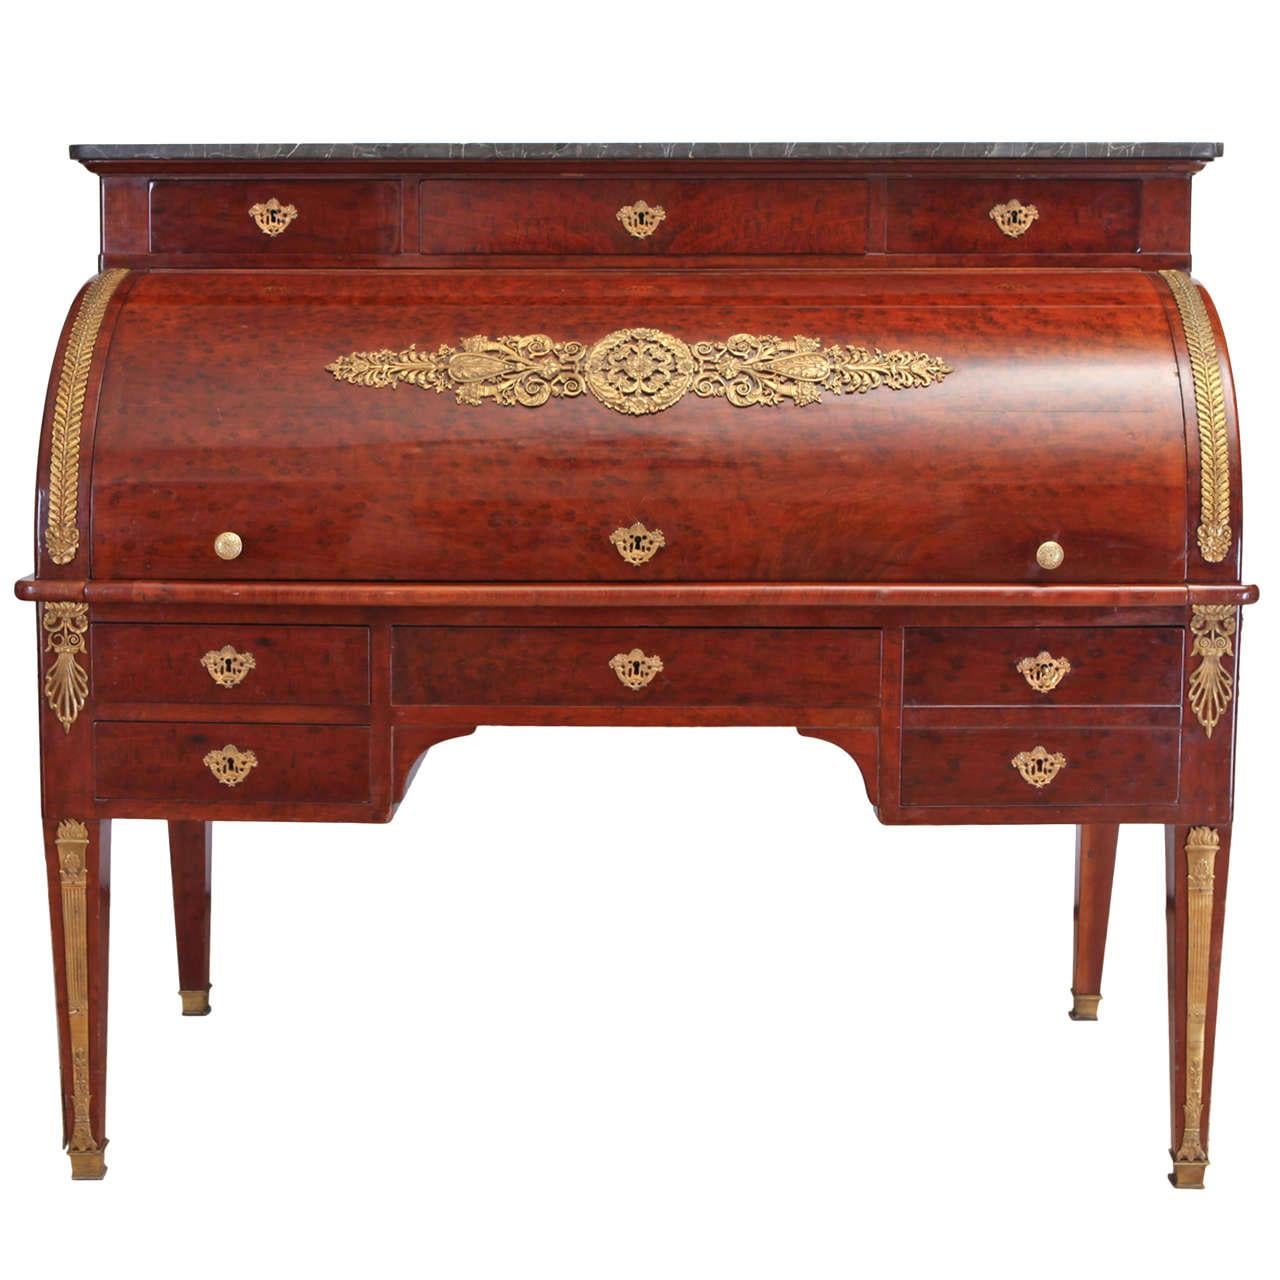 French Empire Mahogany Bureau à Cylindre Writing Table, circa 1810 For Sale 7